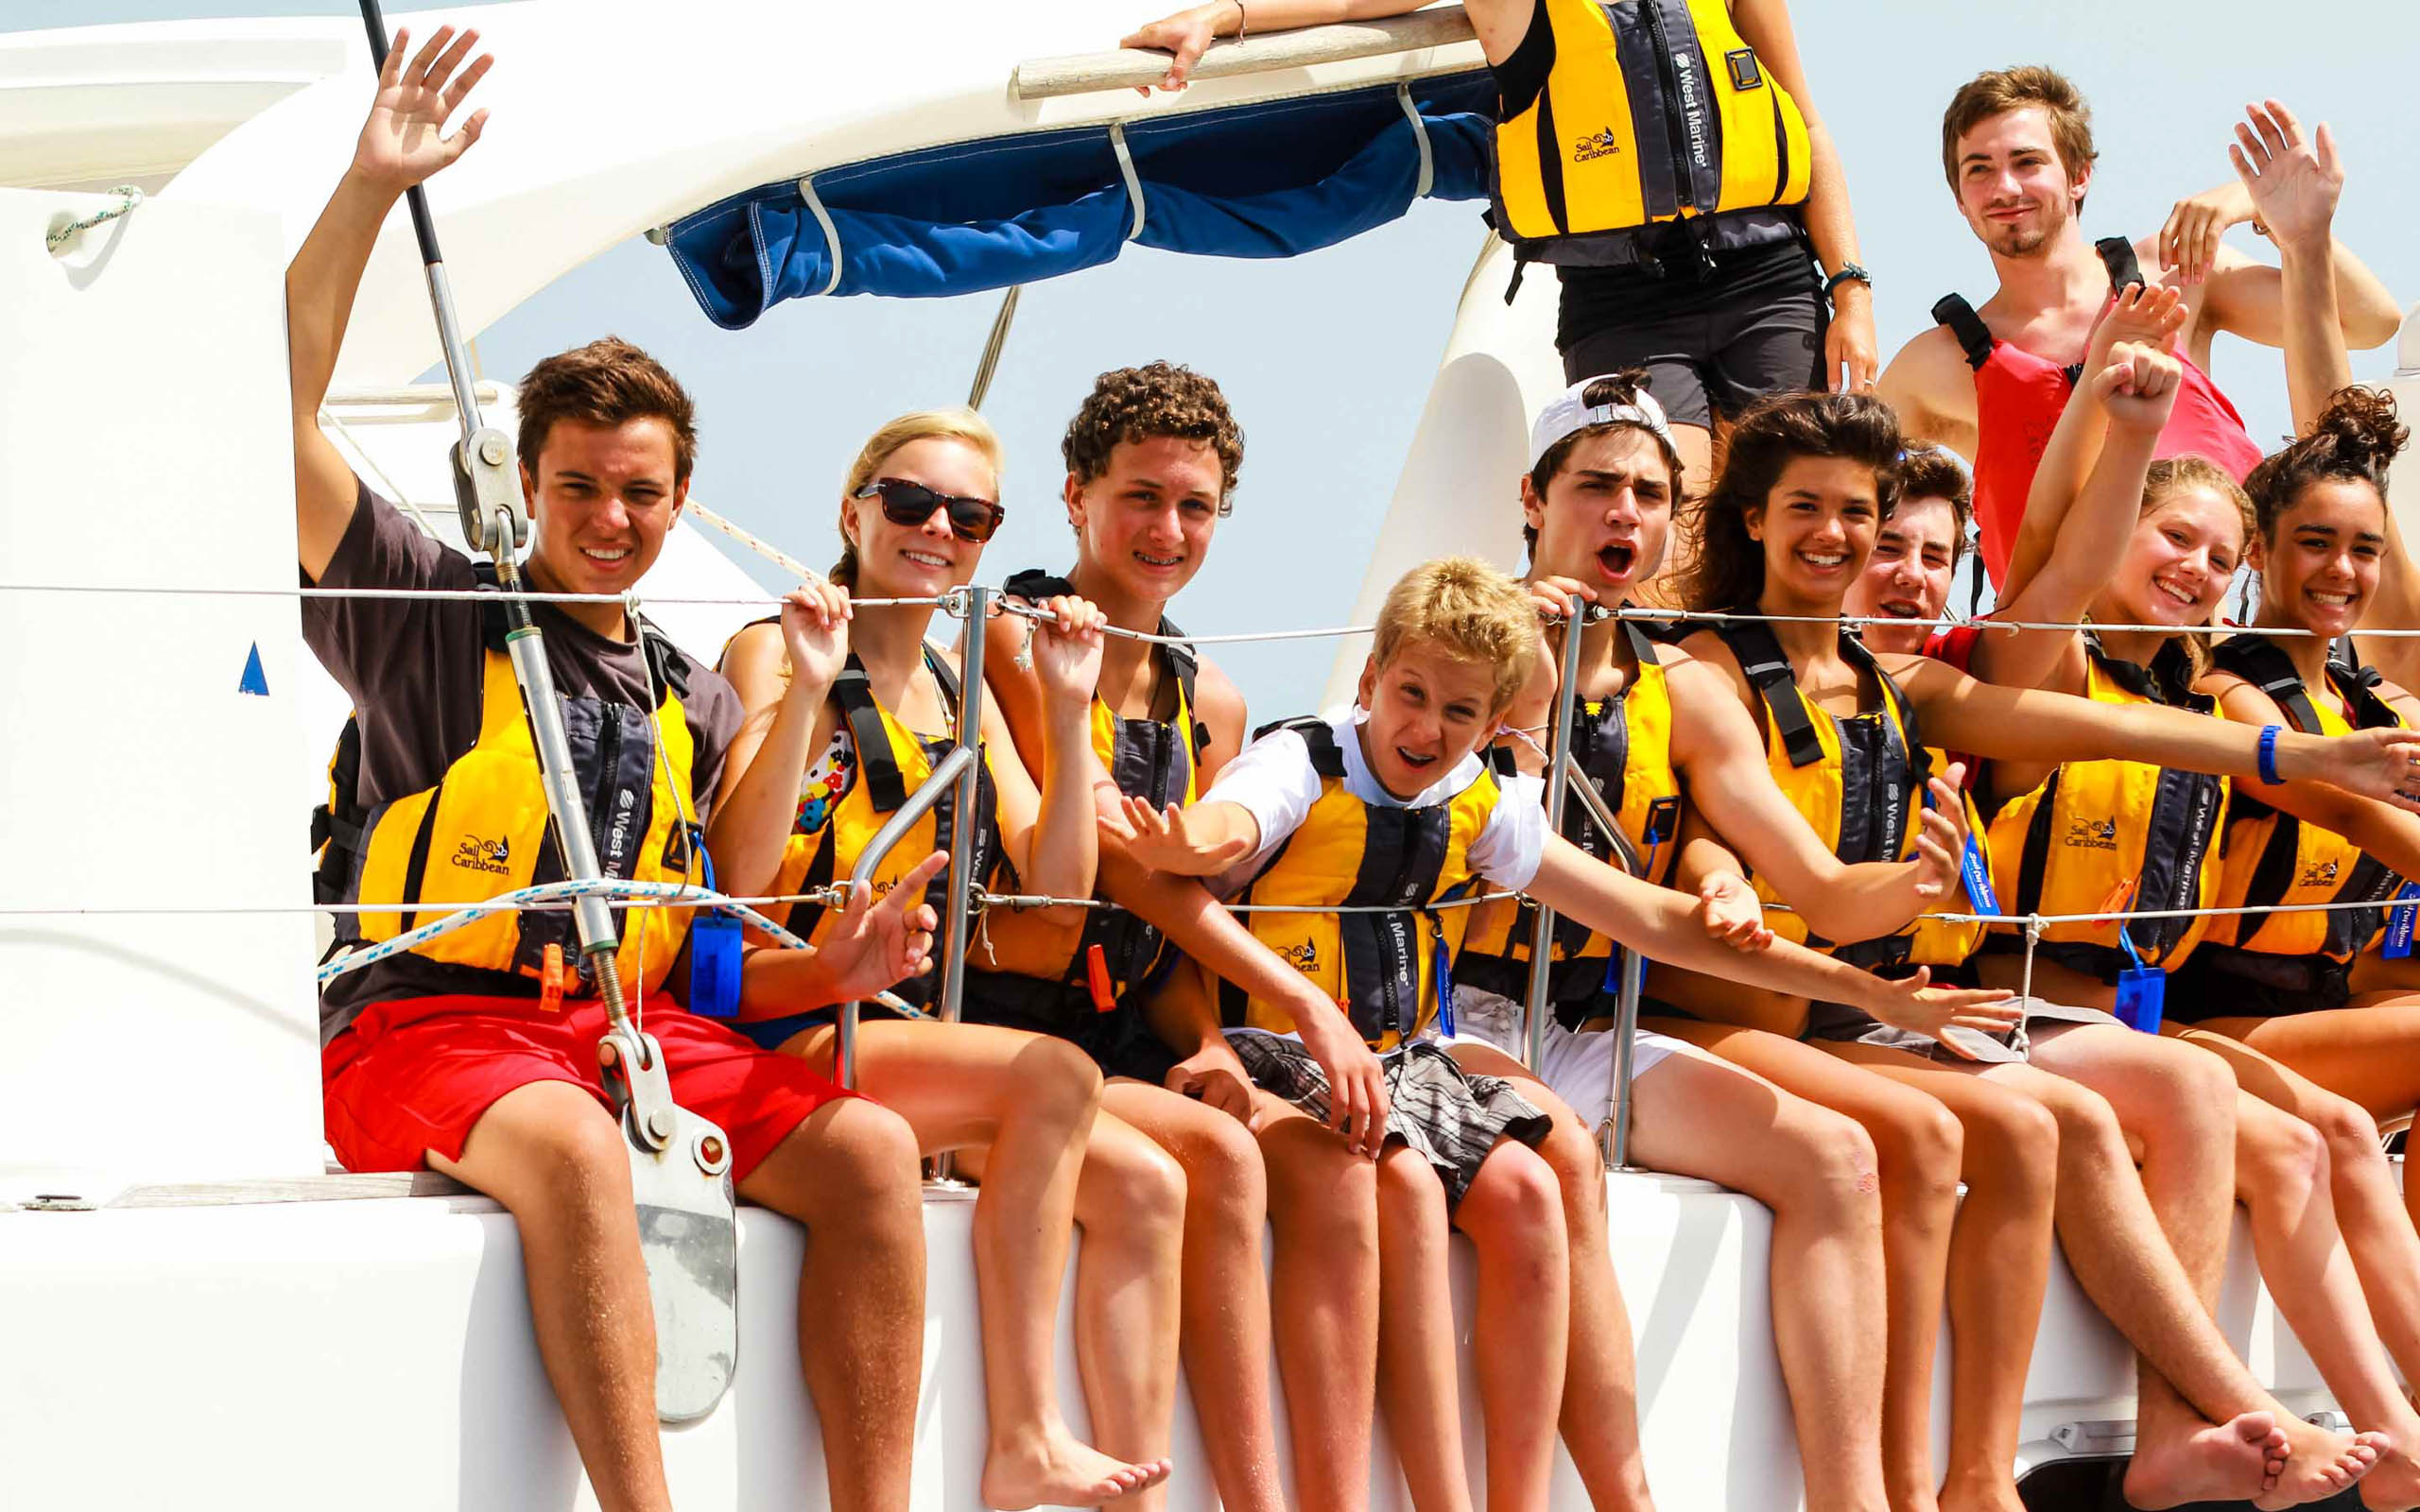 A group of people on a boat waving their life jackets.